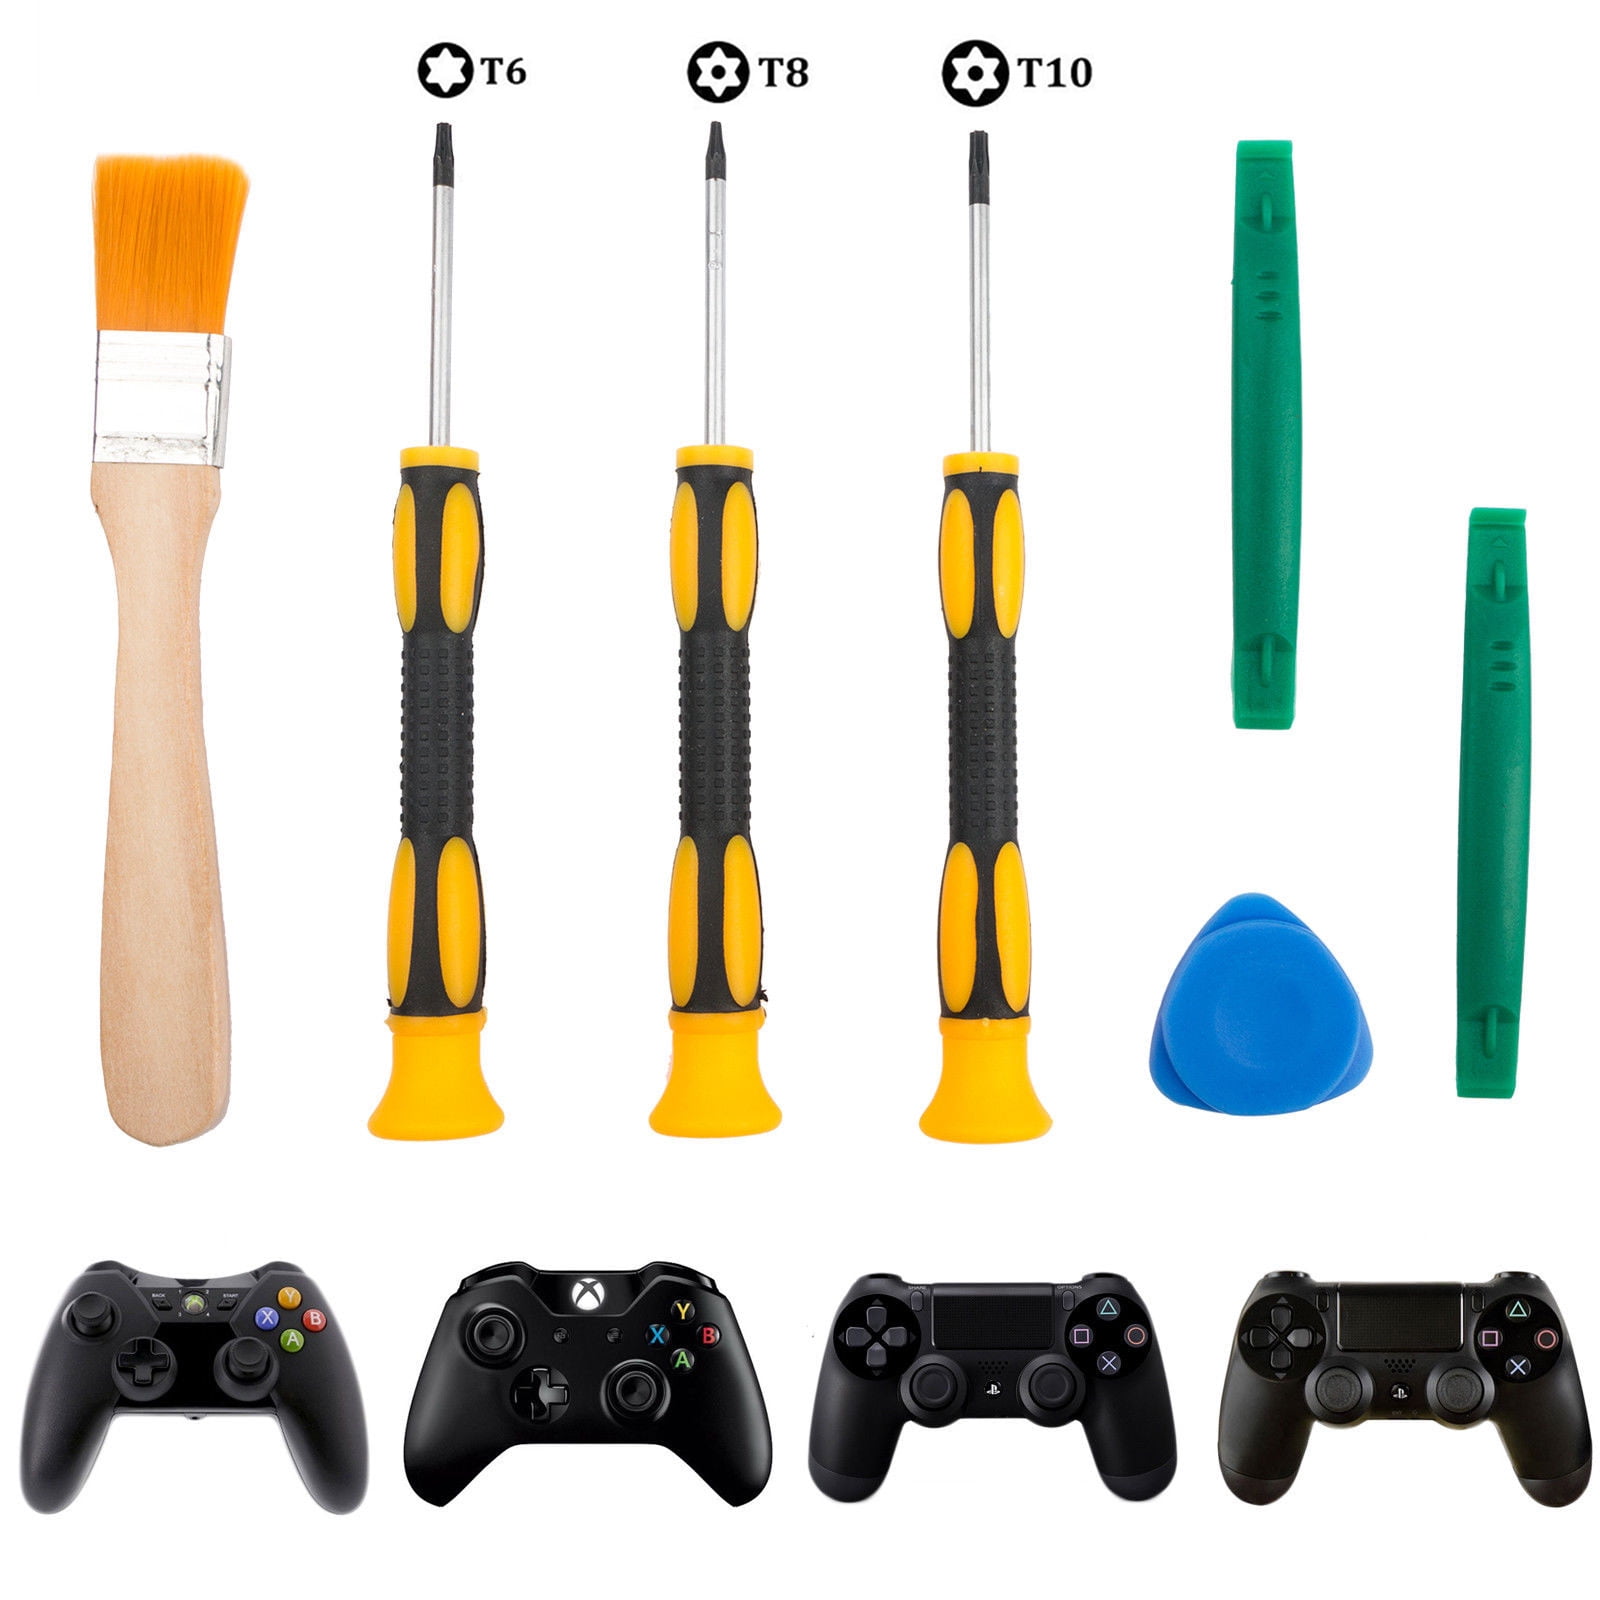 7in1 Screwdriver Repair Cleaning Tool Kit for Xbox One/Xbox 360 Controller and Sony PlayStation PS3 PS4 Controller, T6 T8H T10H Screwdriver Repair Prying Tools - Walmart.com